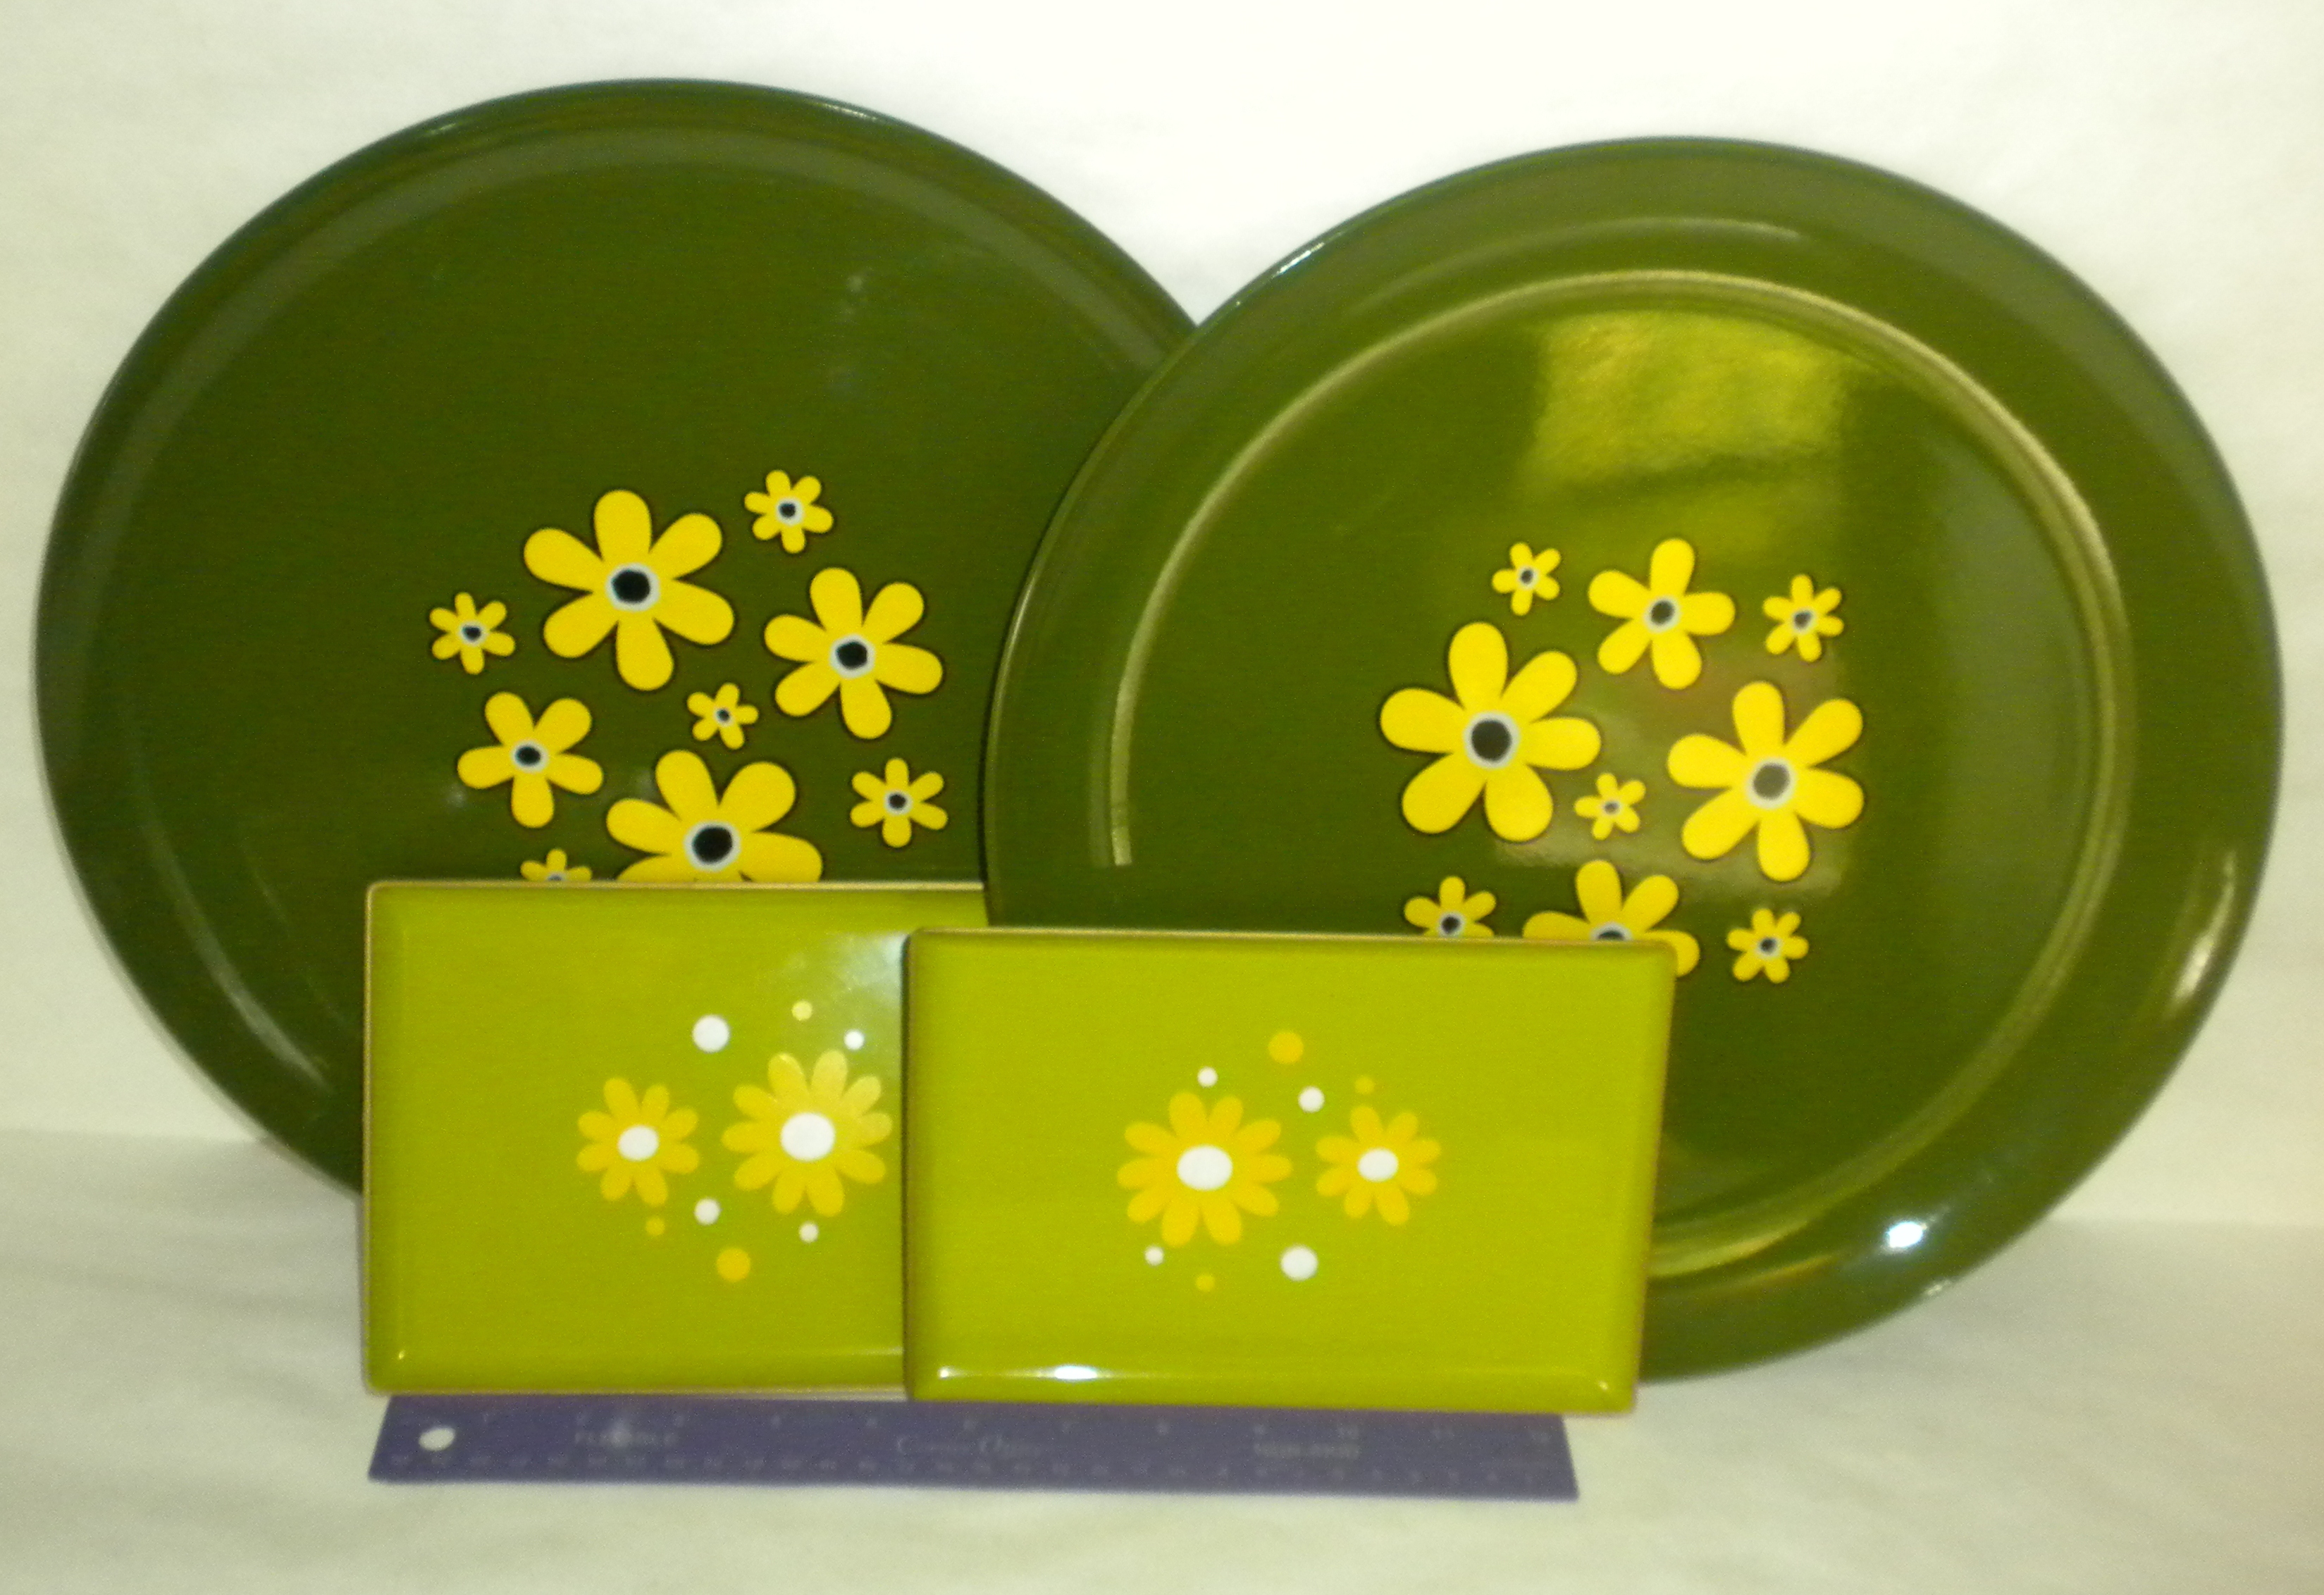 2 vintage Japanese green plates and 2 matching trays, green with yellow flower pattern. CC 2.0 mad_mod_vintage on Flickr